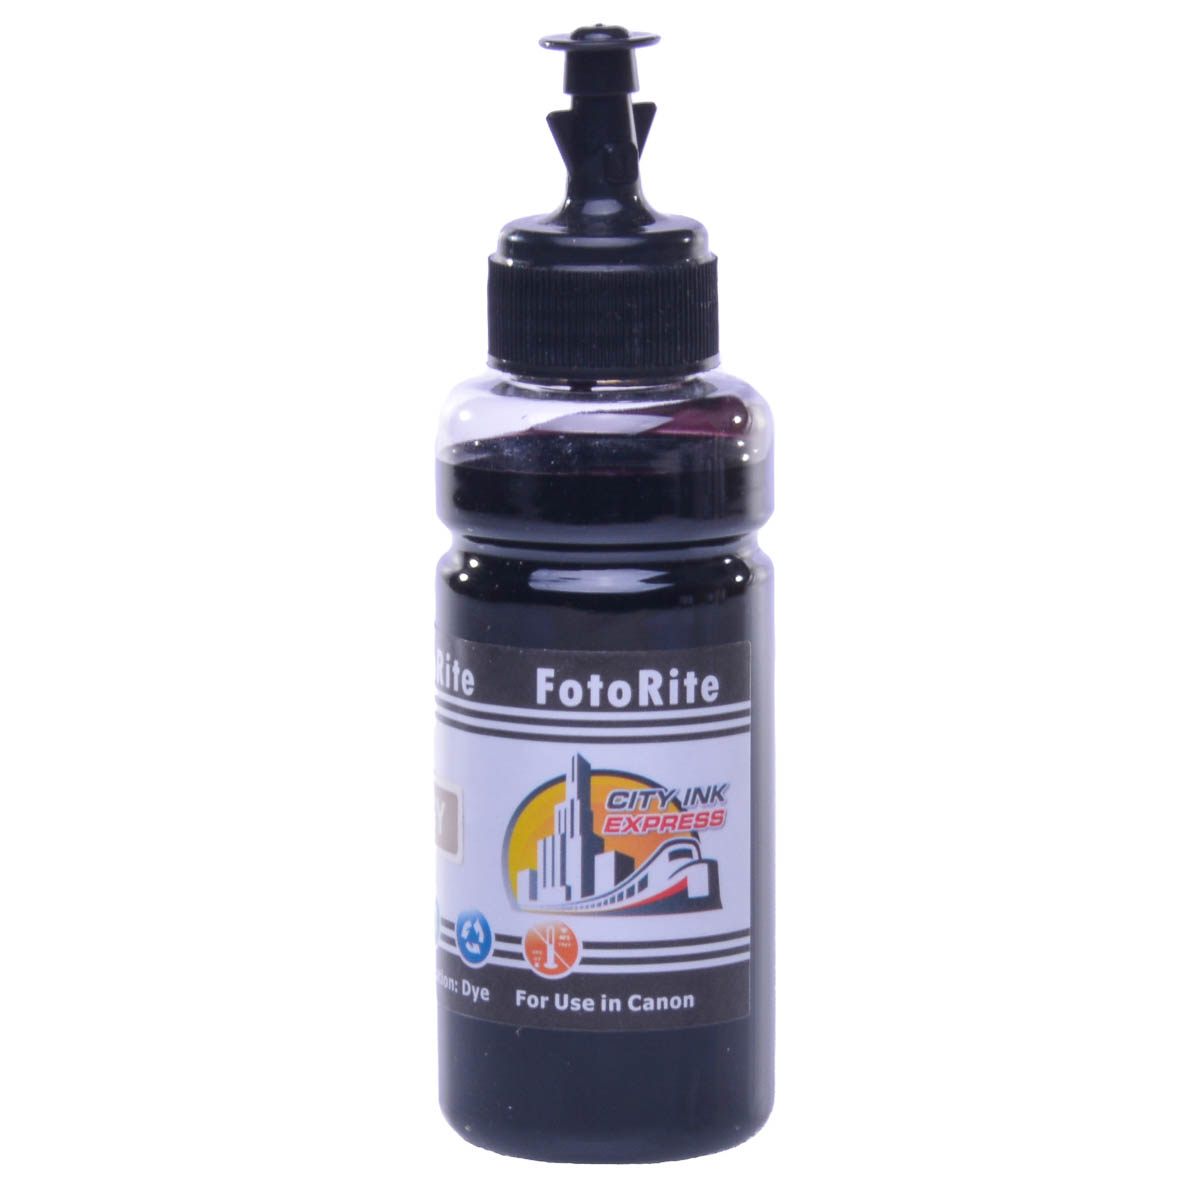 Cheap Grey dye ink replaces Canon Pixma MG7150 - CLI-551GY